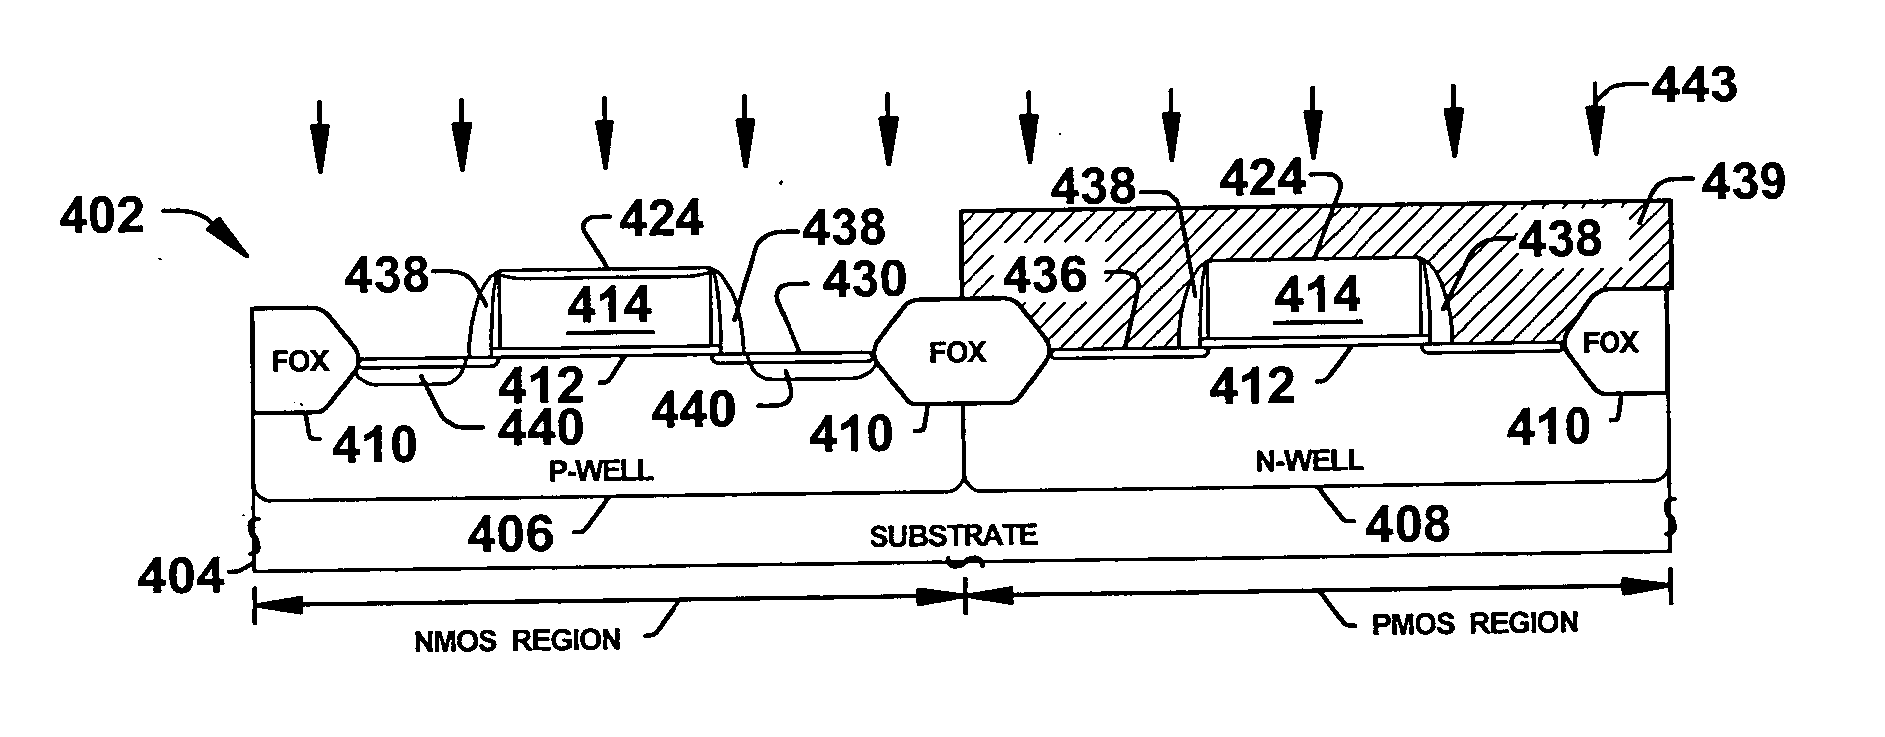 Method to selectively strain NMOS devices using a cap poly layer